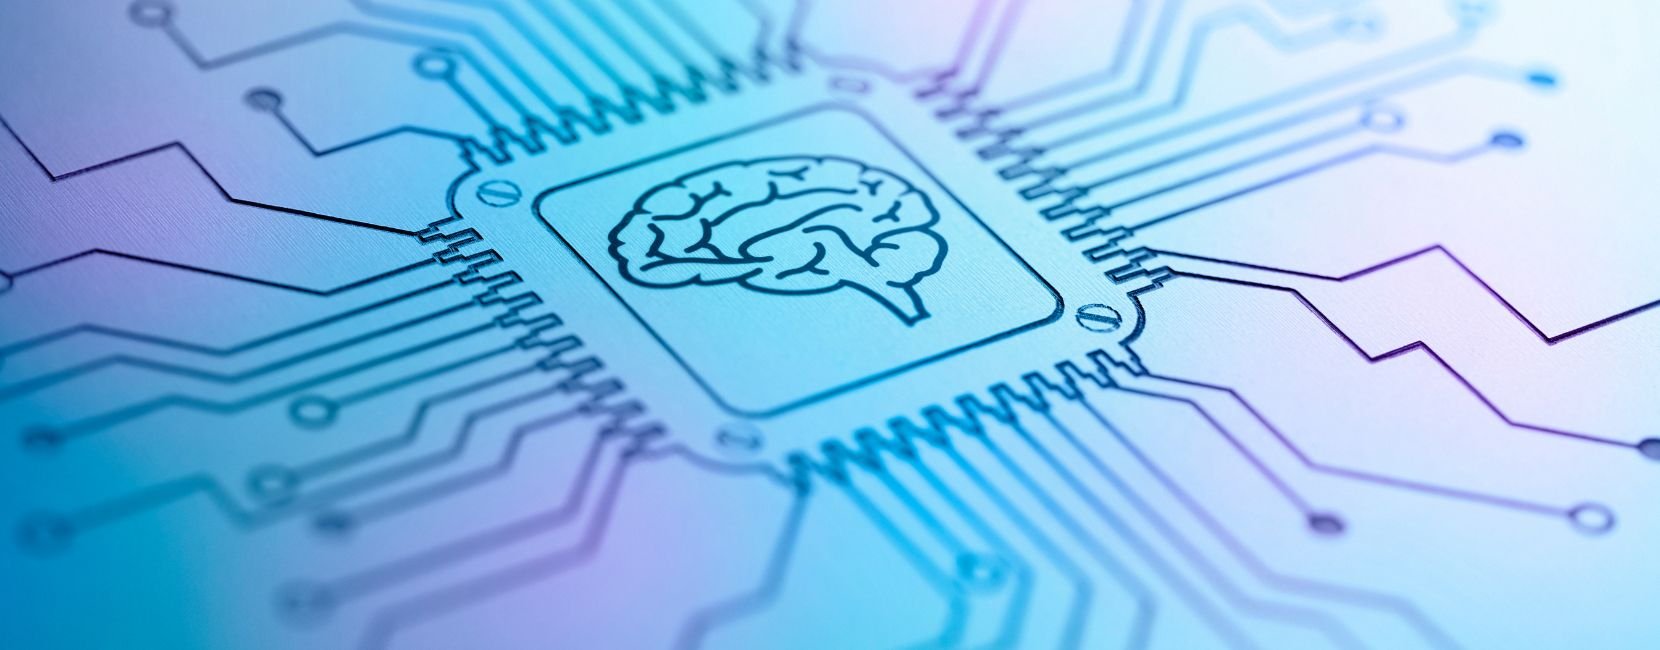 A drawing of a brain on a computer chip